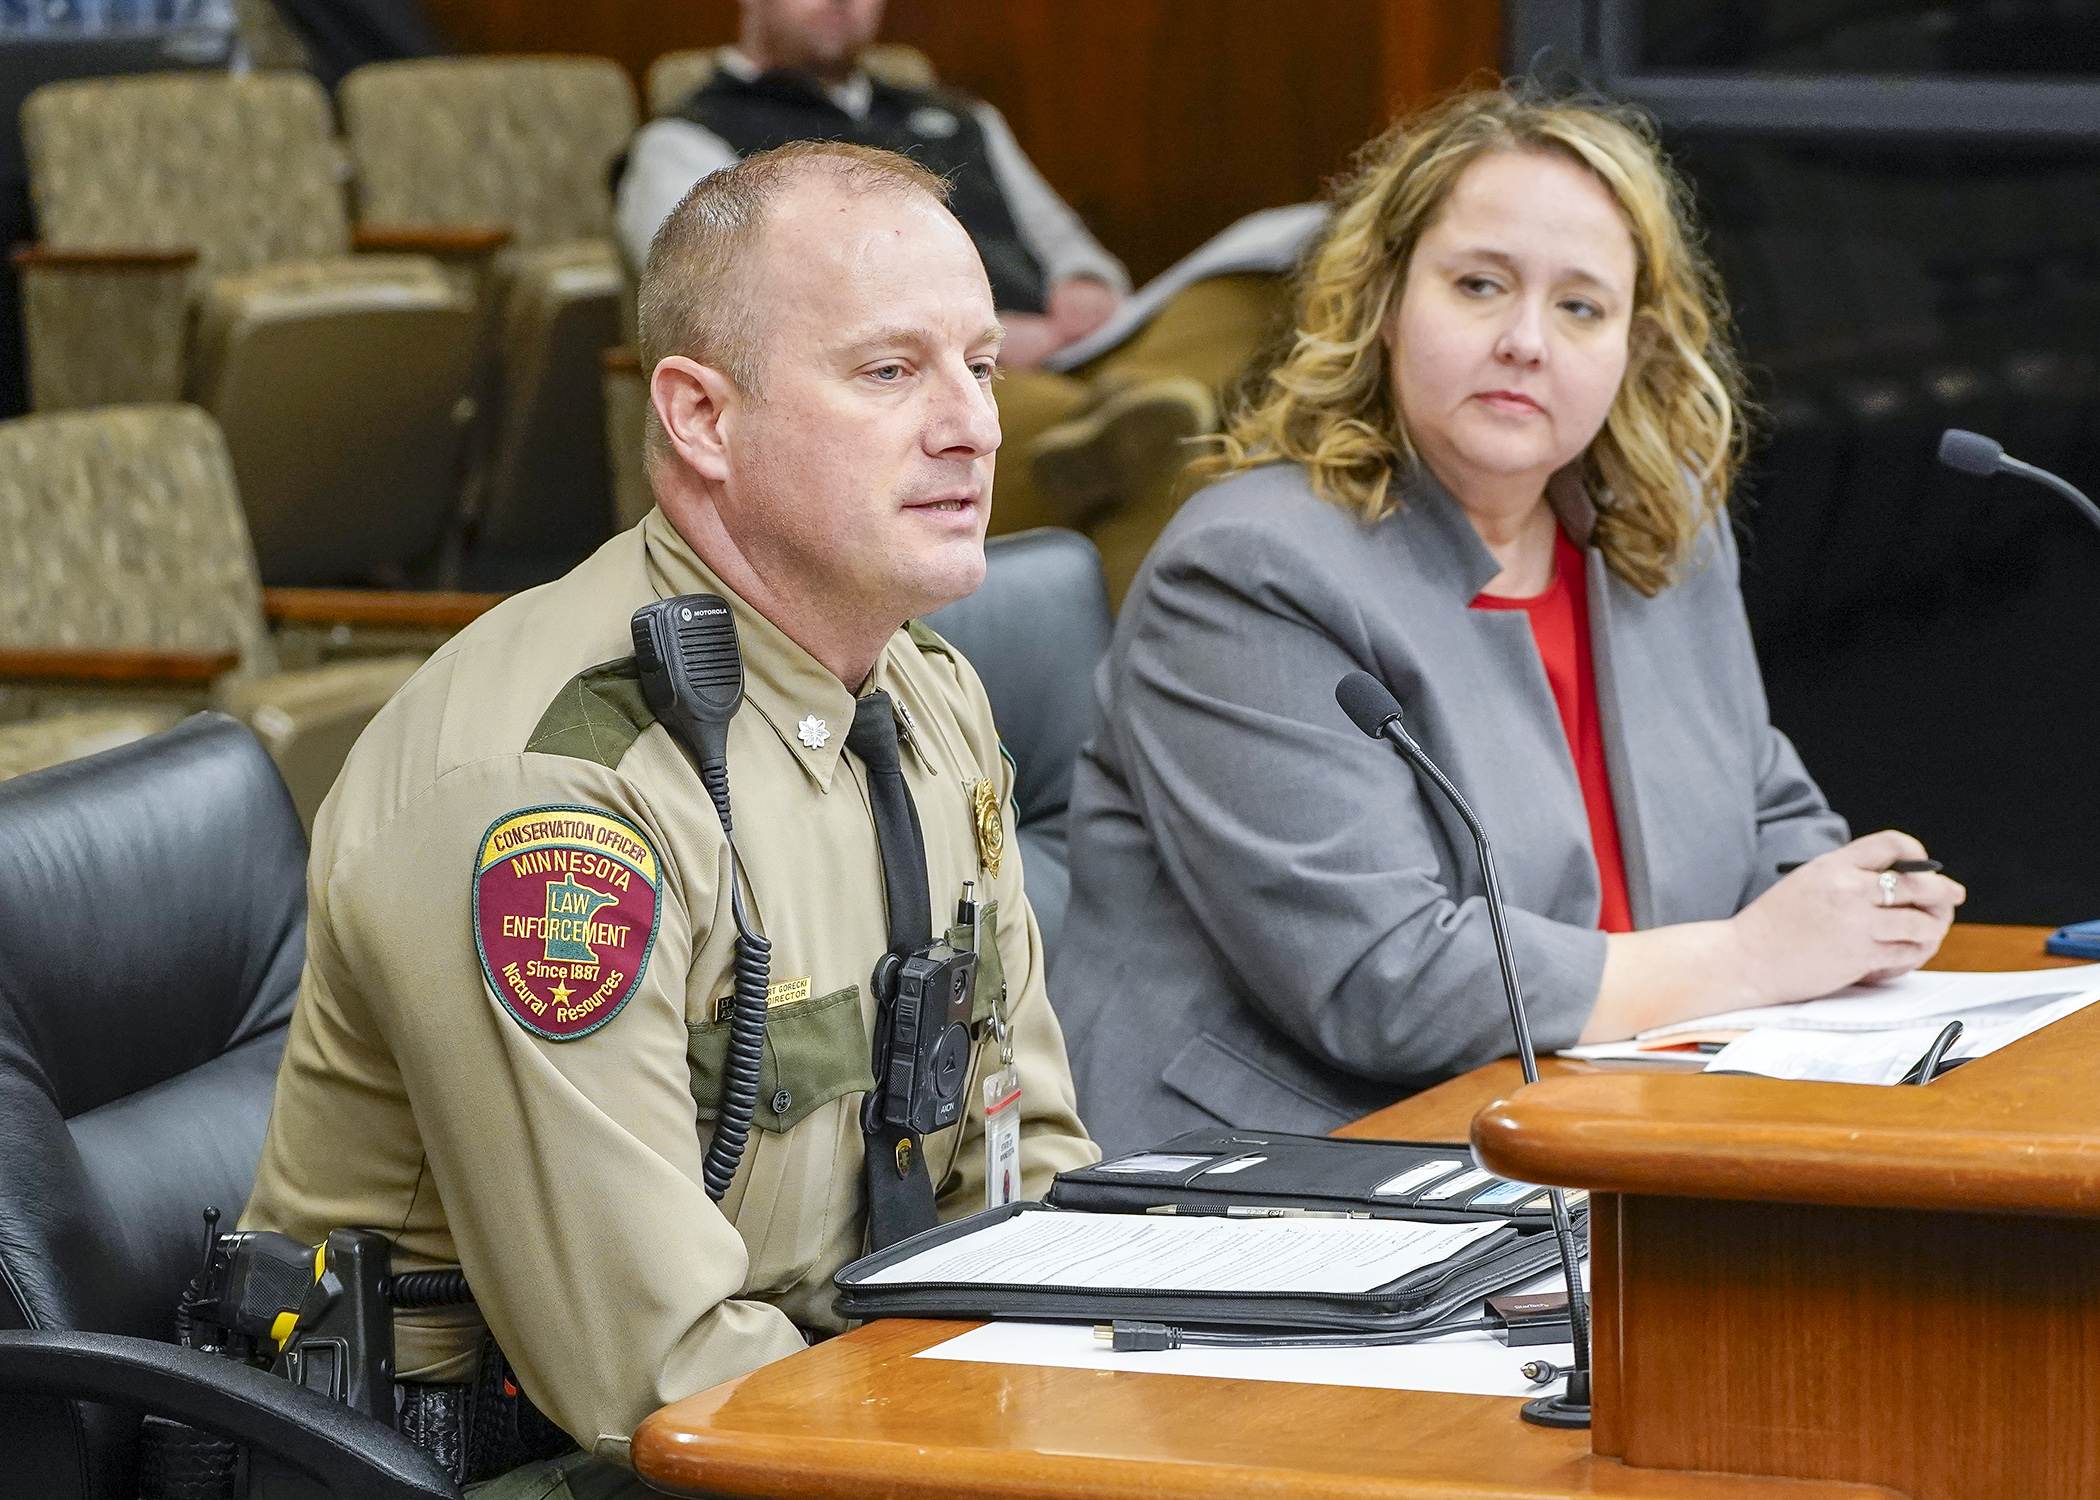 Department of Natural Resources Lt. Col. Robert Gorecki testifies before the House Environment and Natural Resources Finance and Policy Committee in support of HF3376 Rep. Emma Greenman, right, is the bill sponsor. (Photo by Andrew VonBank)